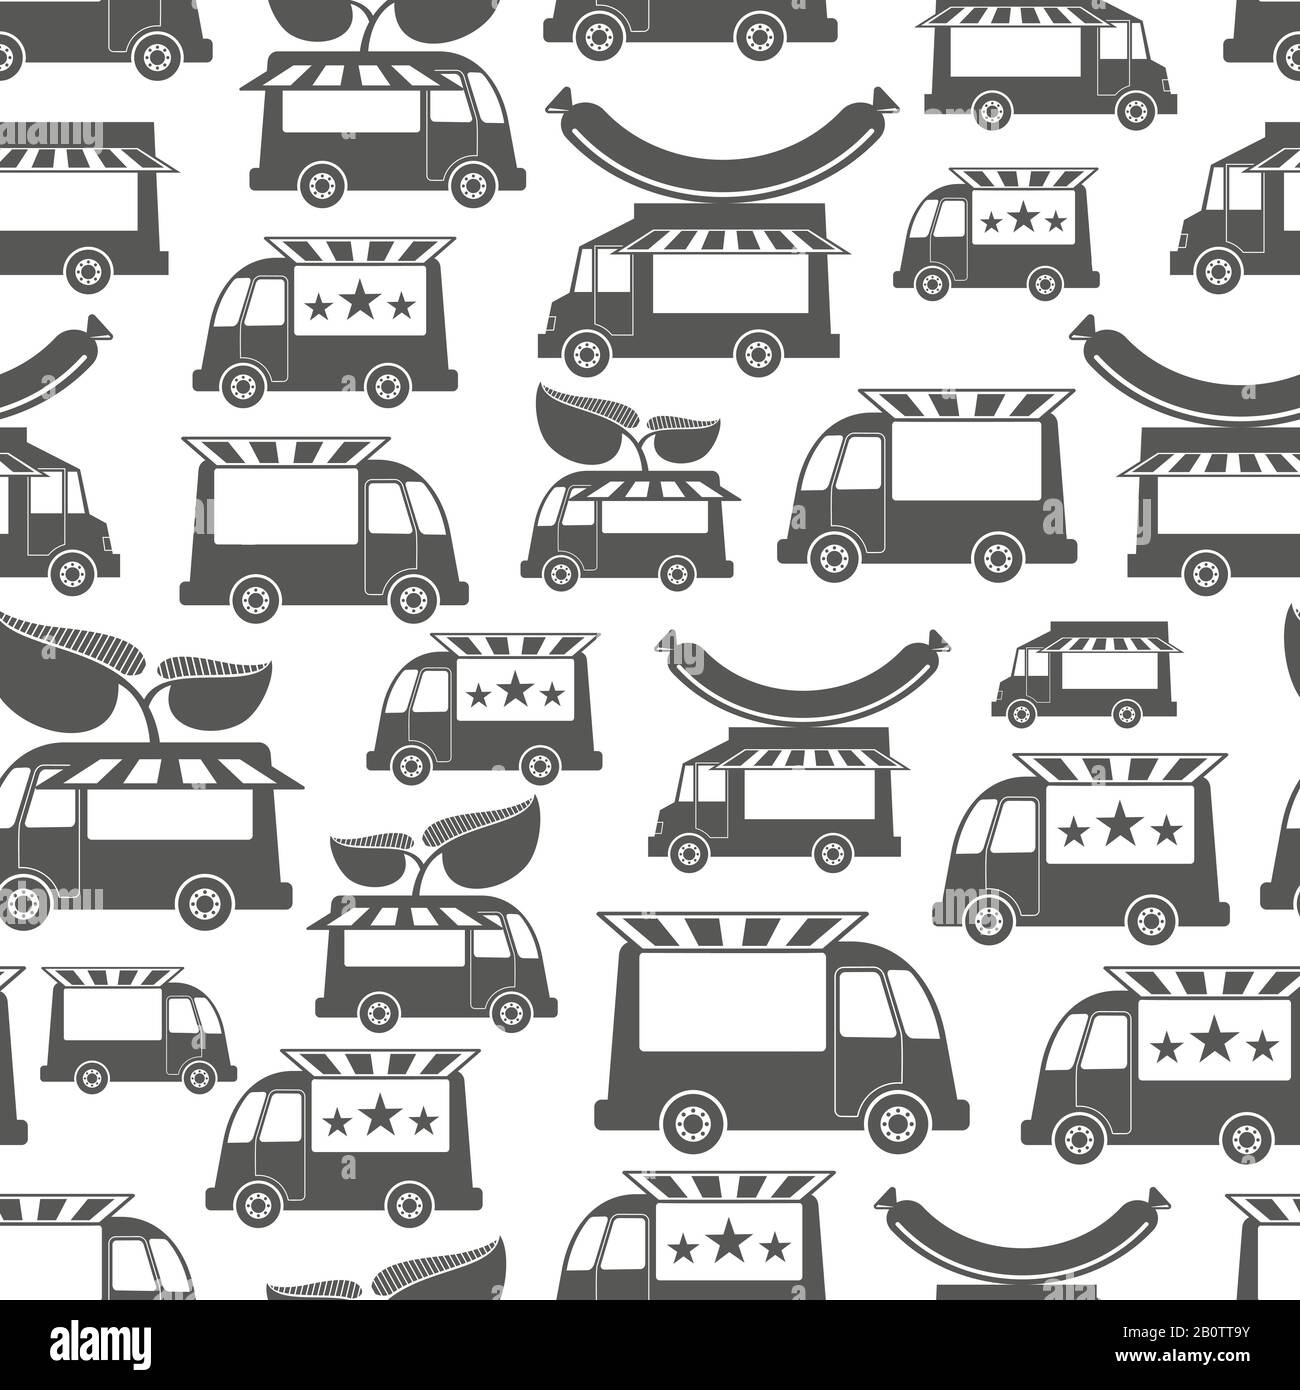 Food trucks with stars, green and sausage - food seamless pattern design. Vector illustration Stock Vector